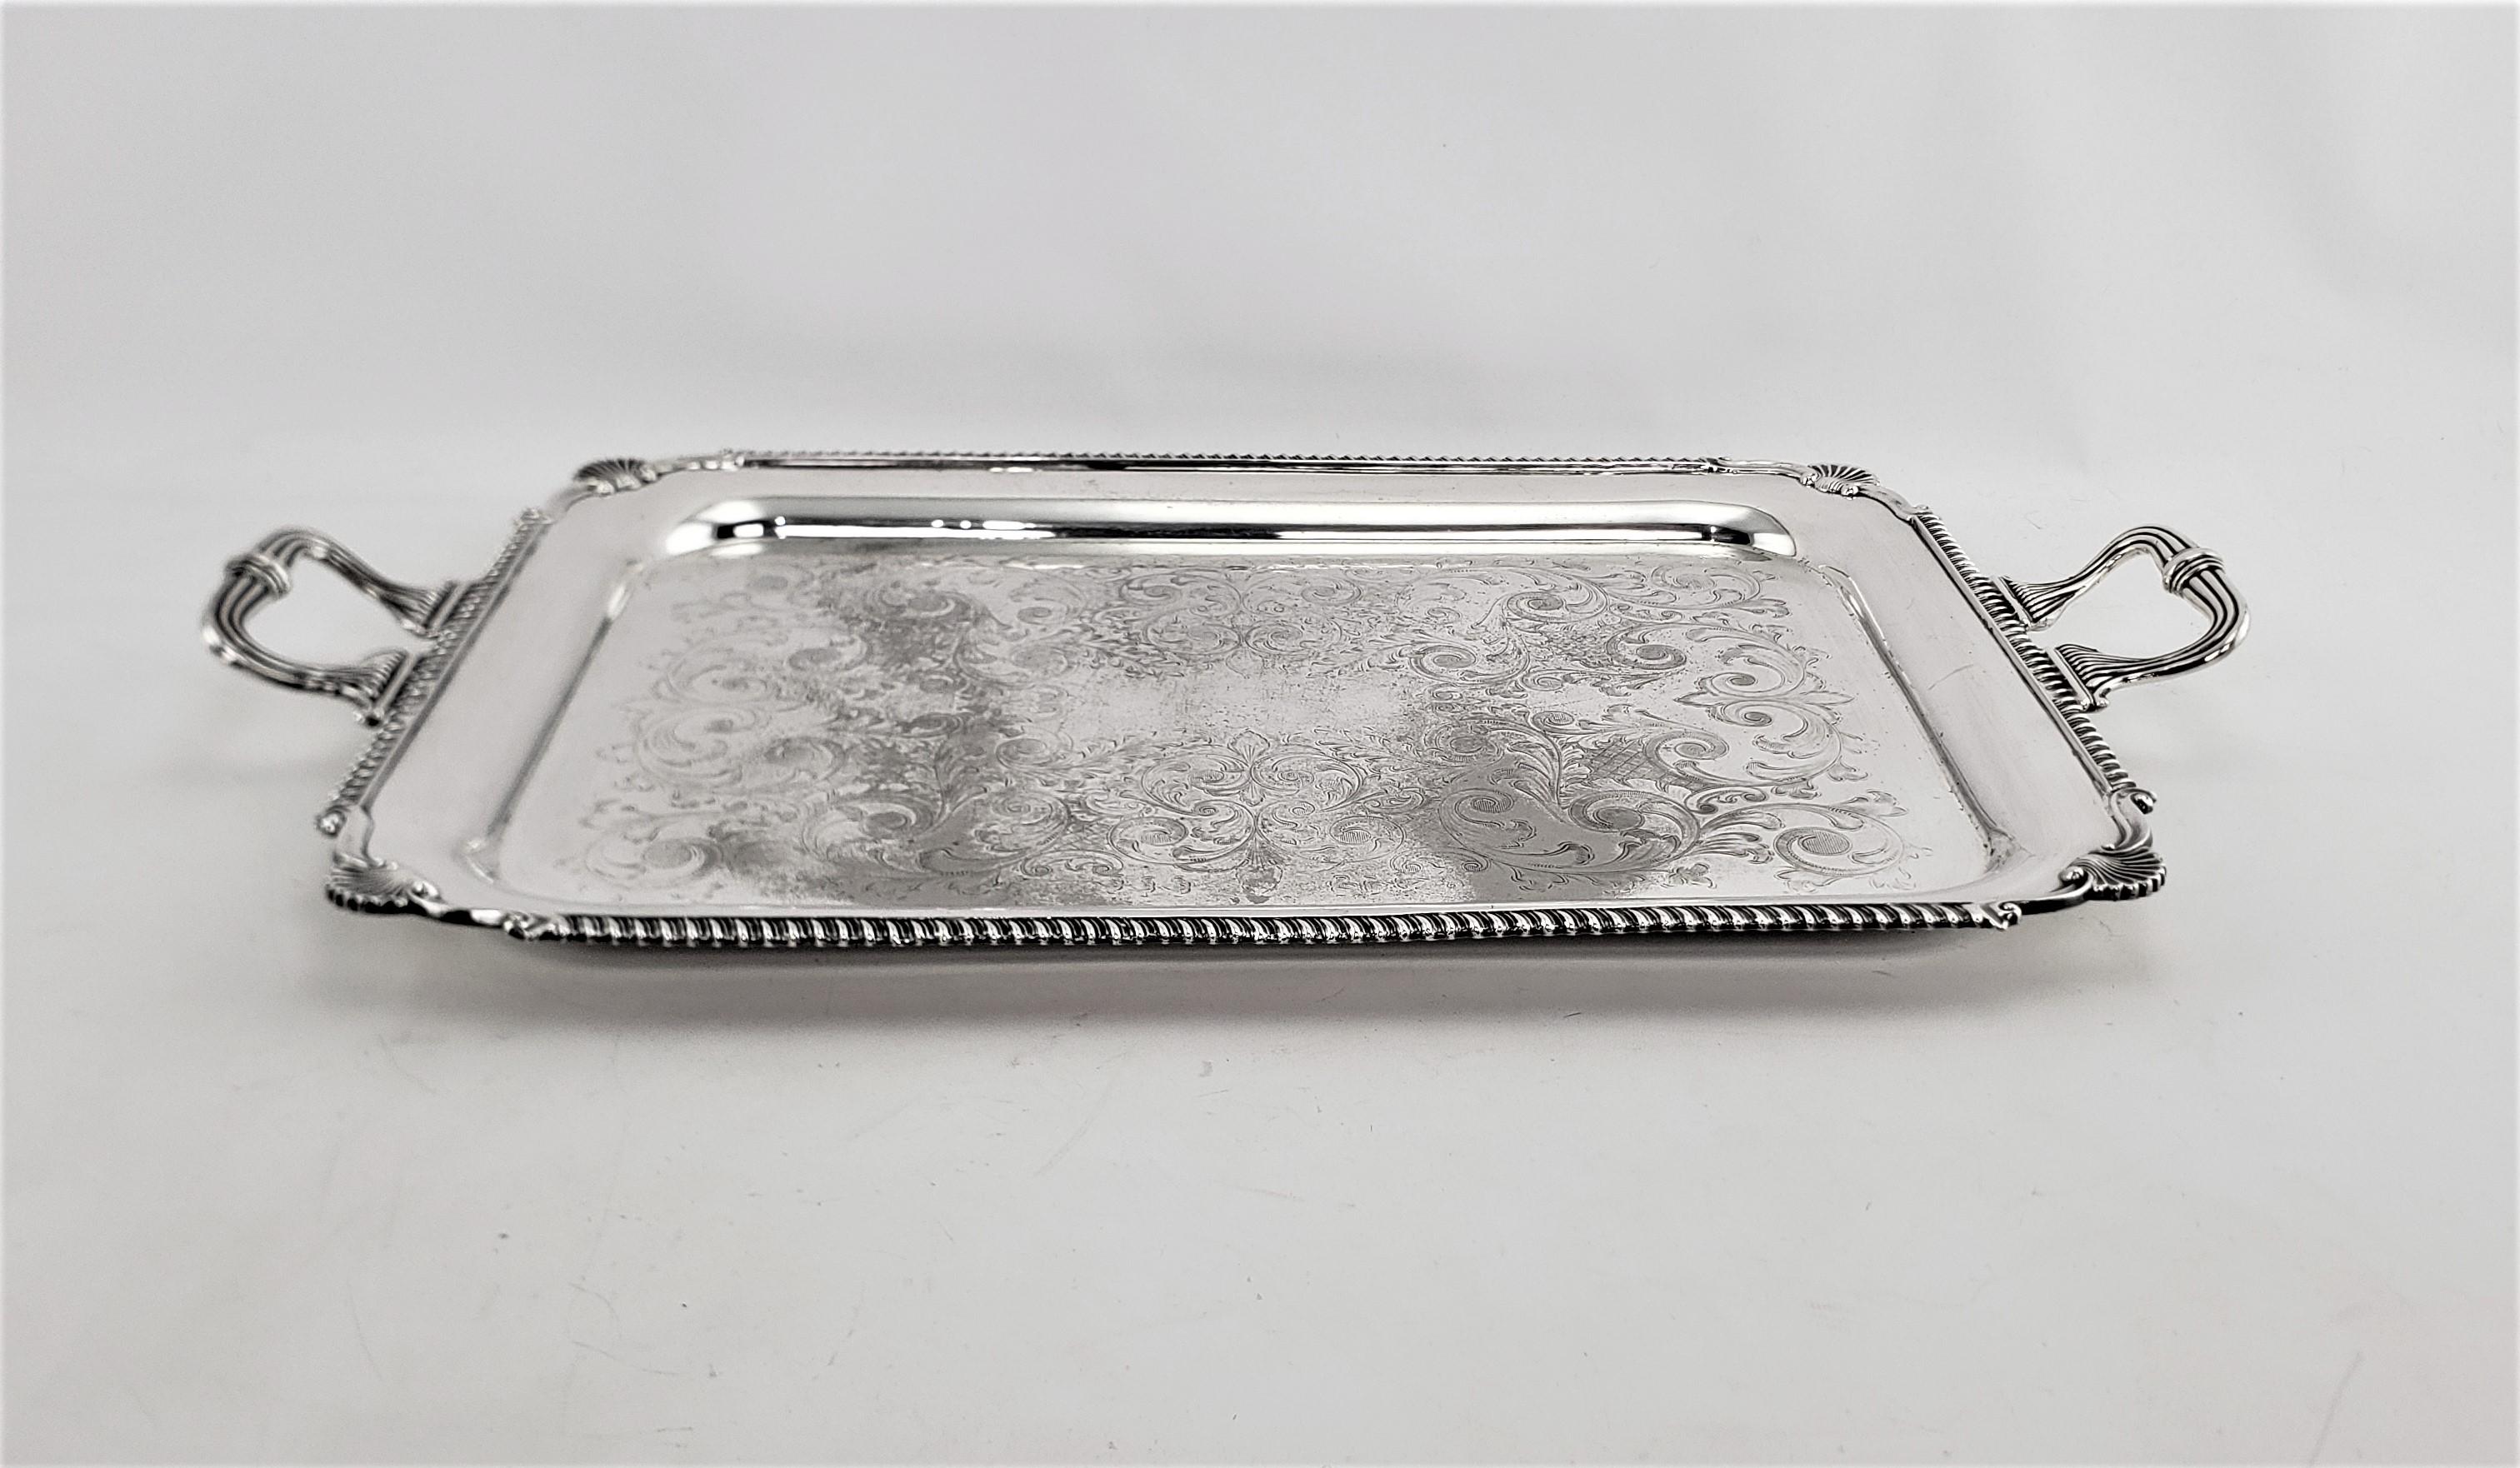 Large Antique English Edwardian Styled Rectangular Silver Plated Serving Tray 2